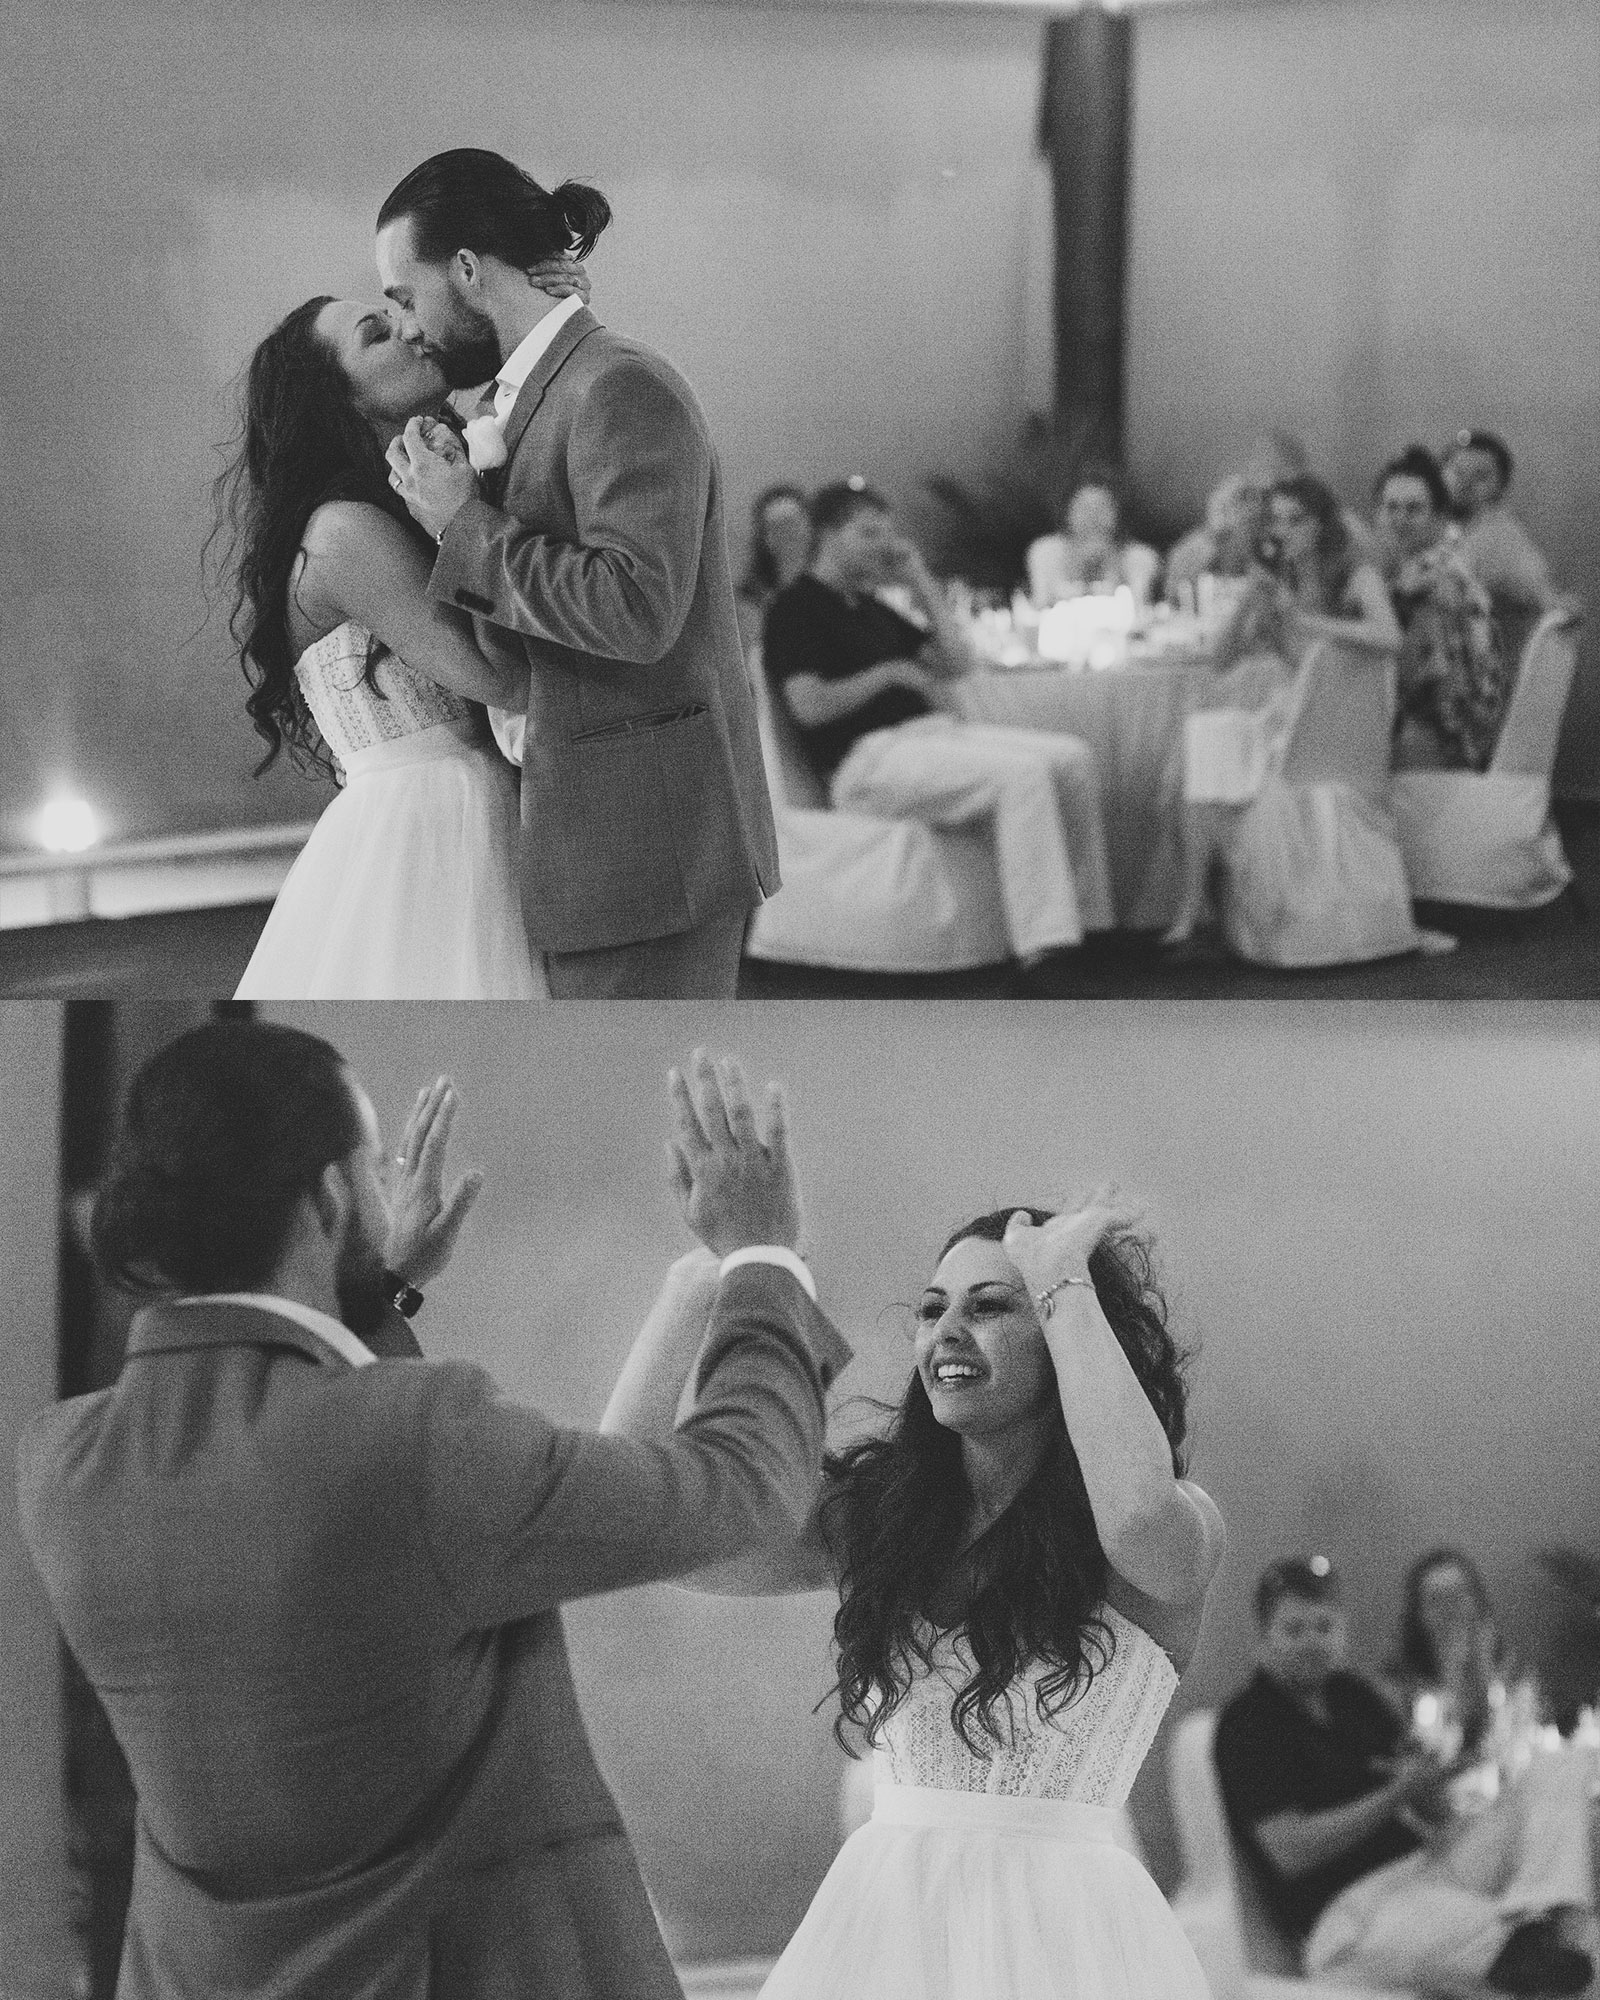 Destination wedding in Mexico, bride and groom's first dance, Groom with a man bun. 